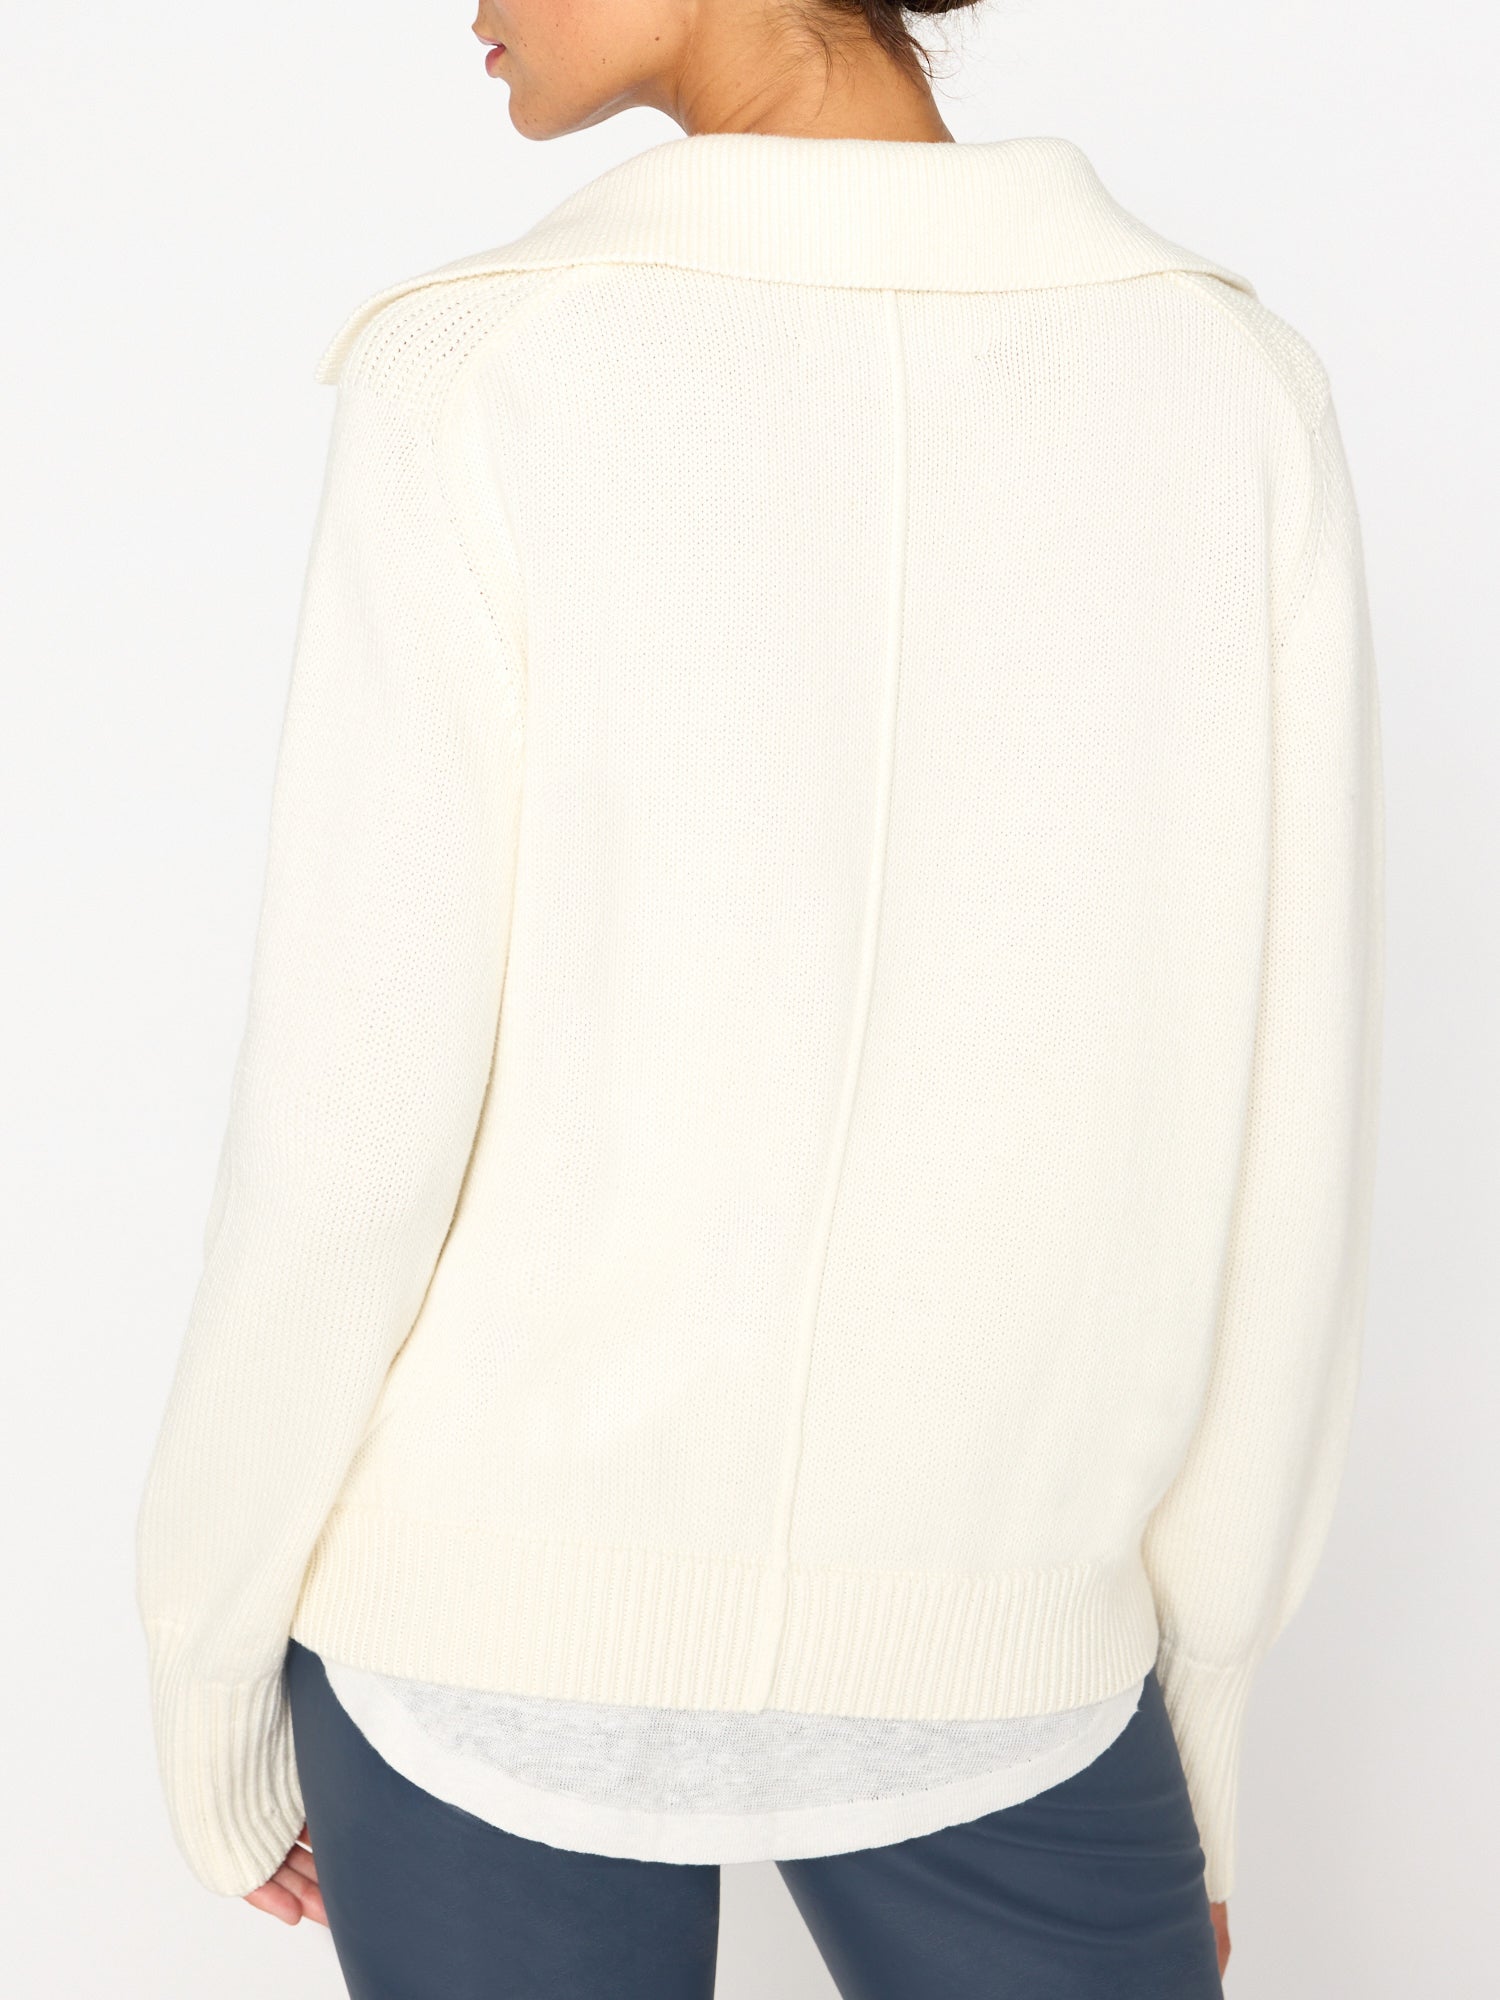 Rainer white layered polo sweater back view